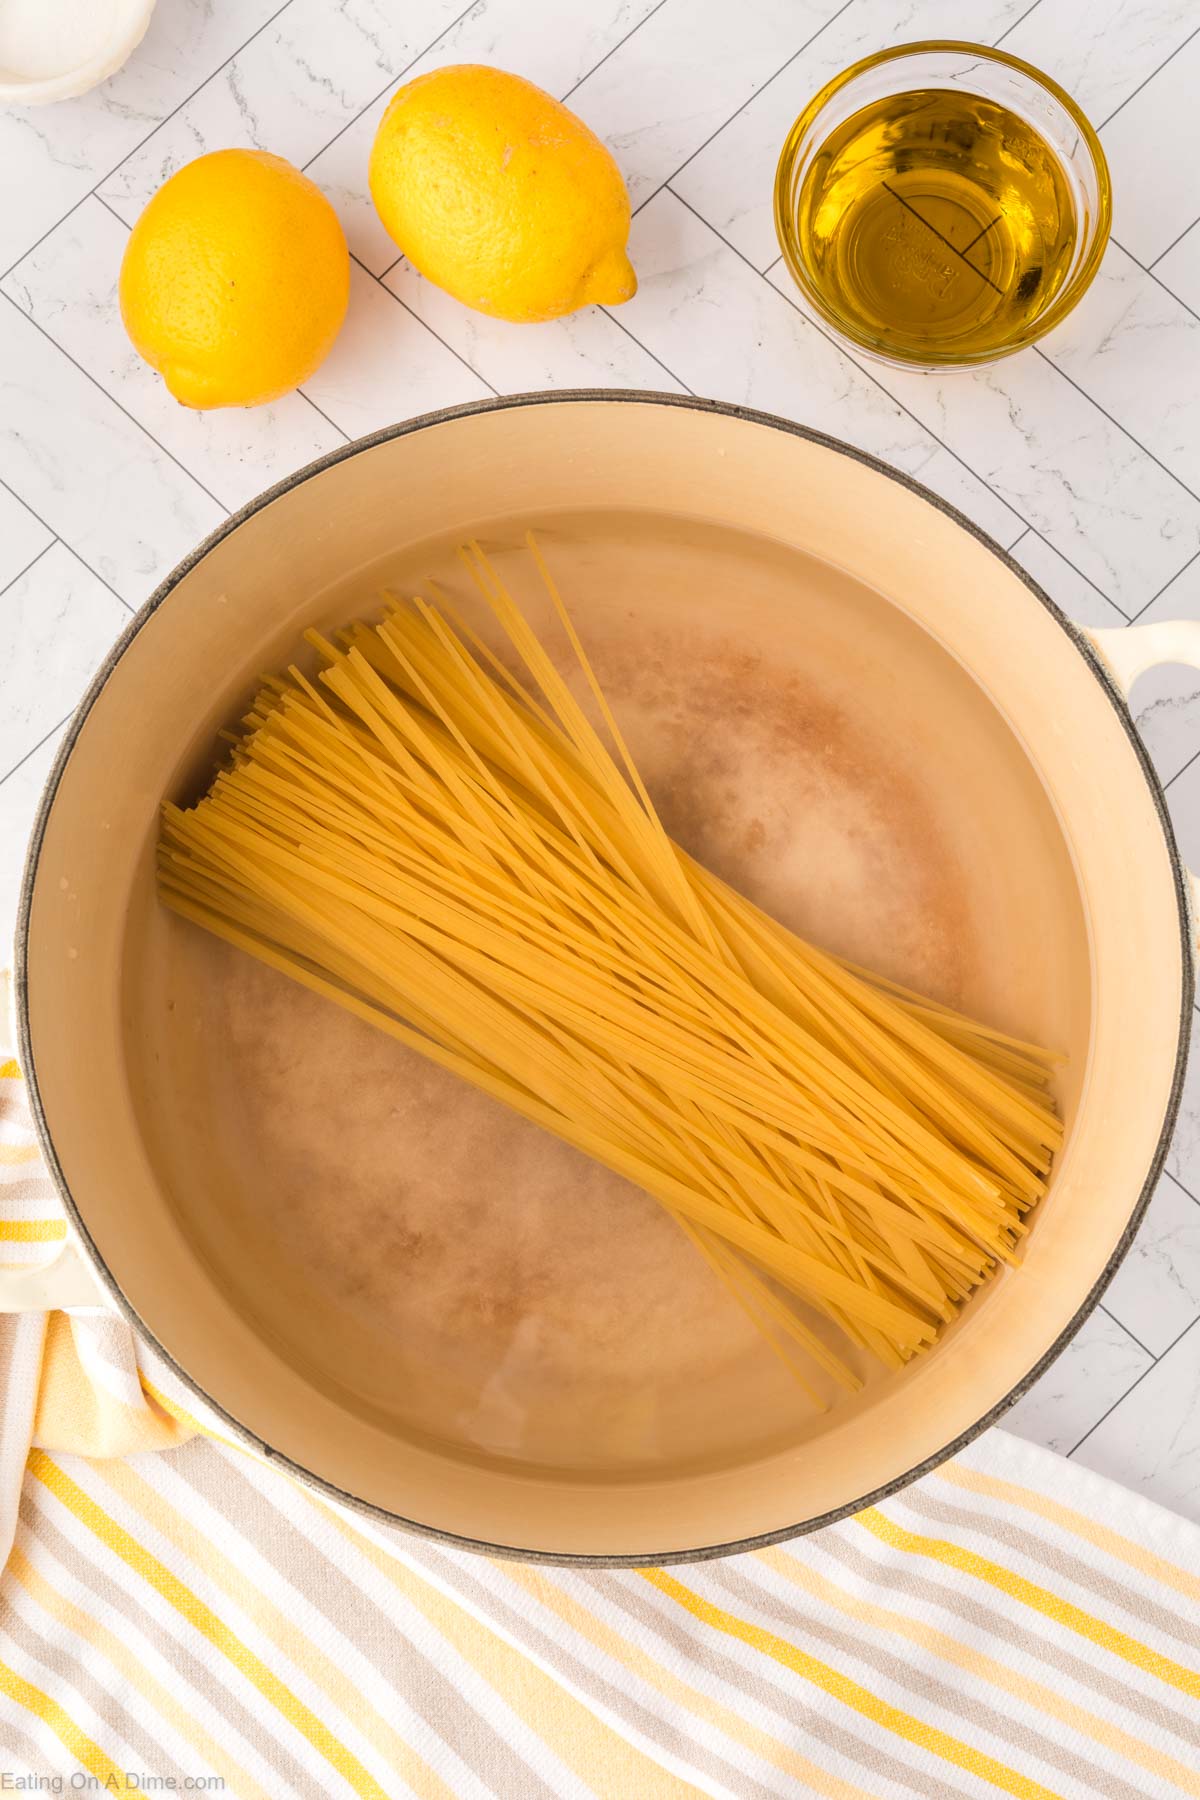 Placing spaghetti noodles in a large pot of water